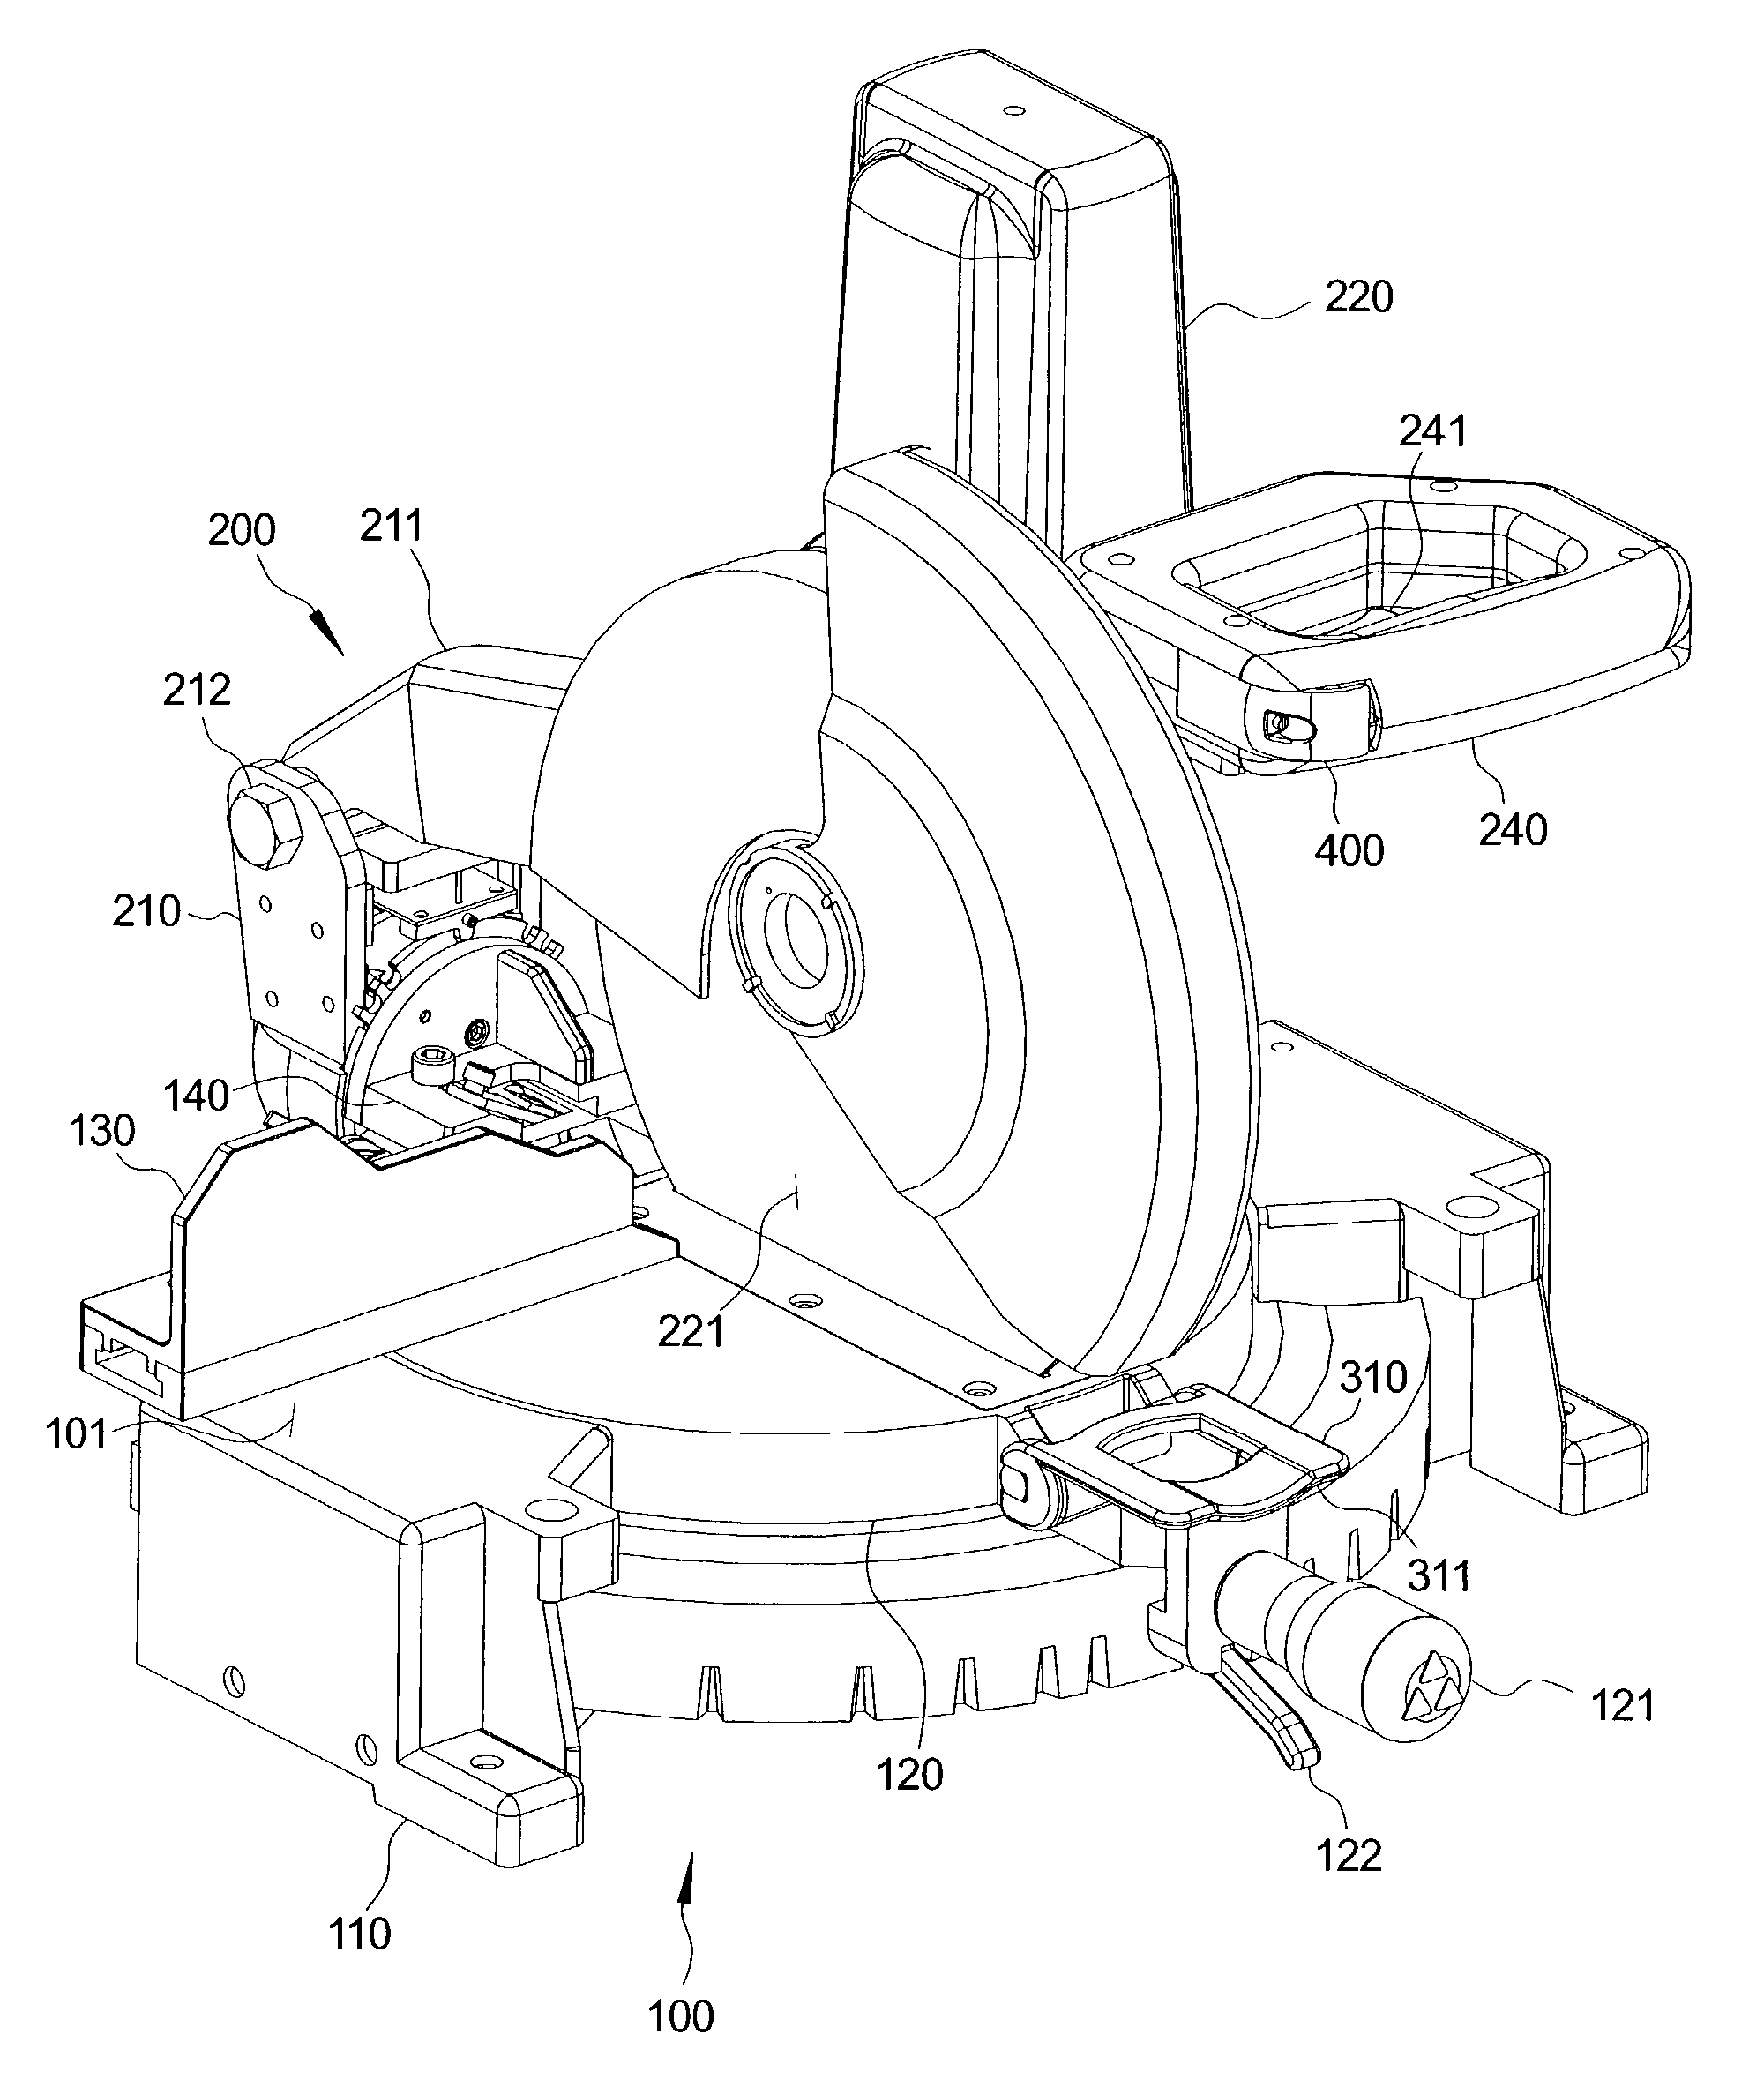 Remotely actuated beveling systems for a miter saw